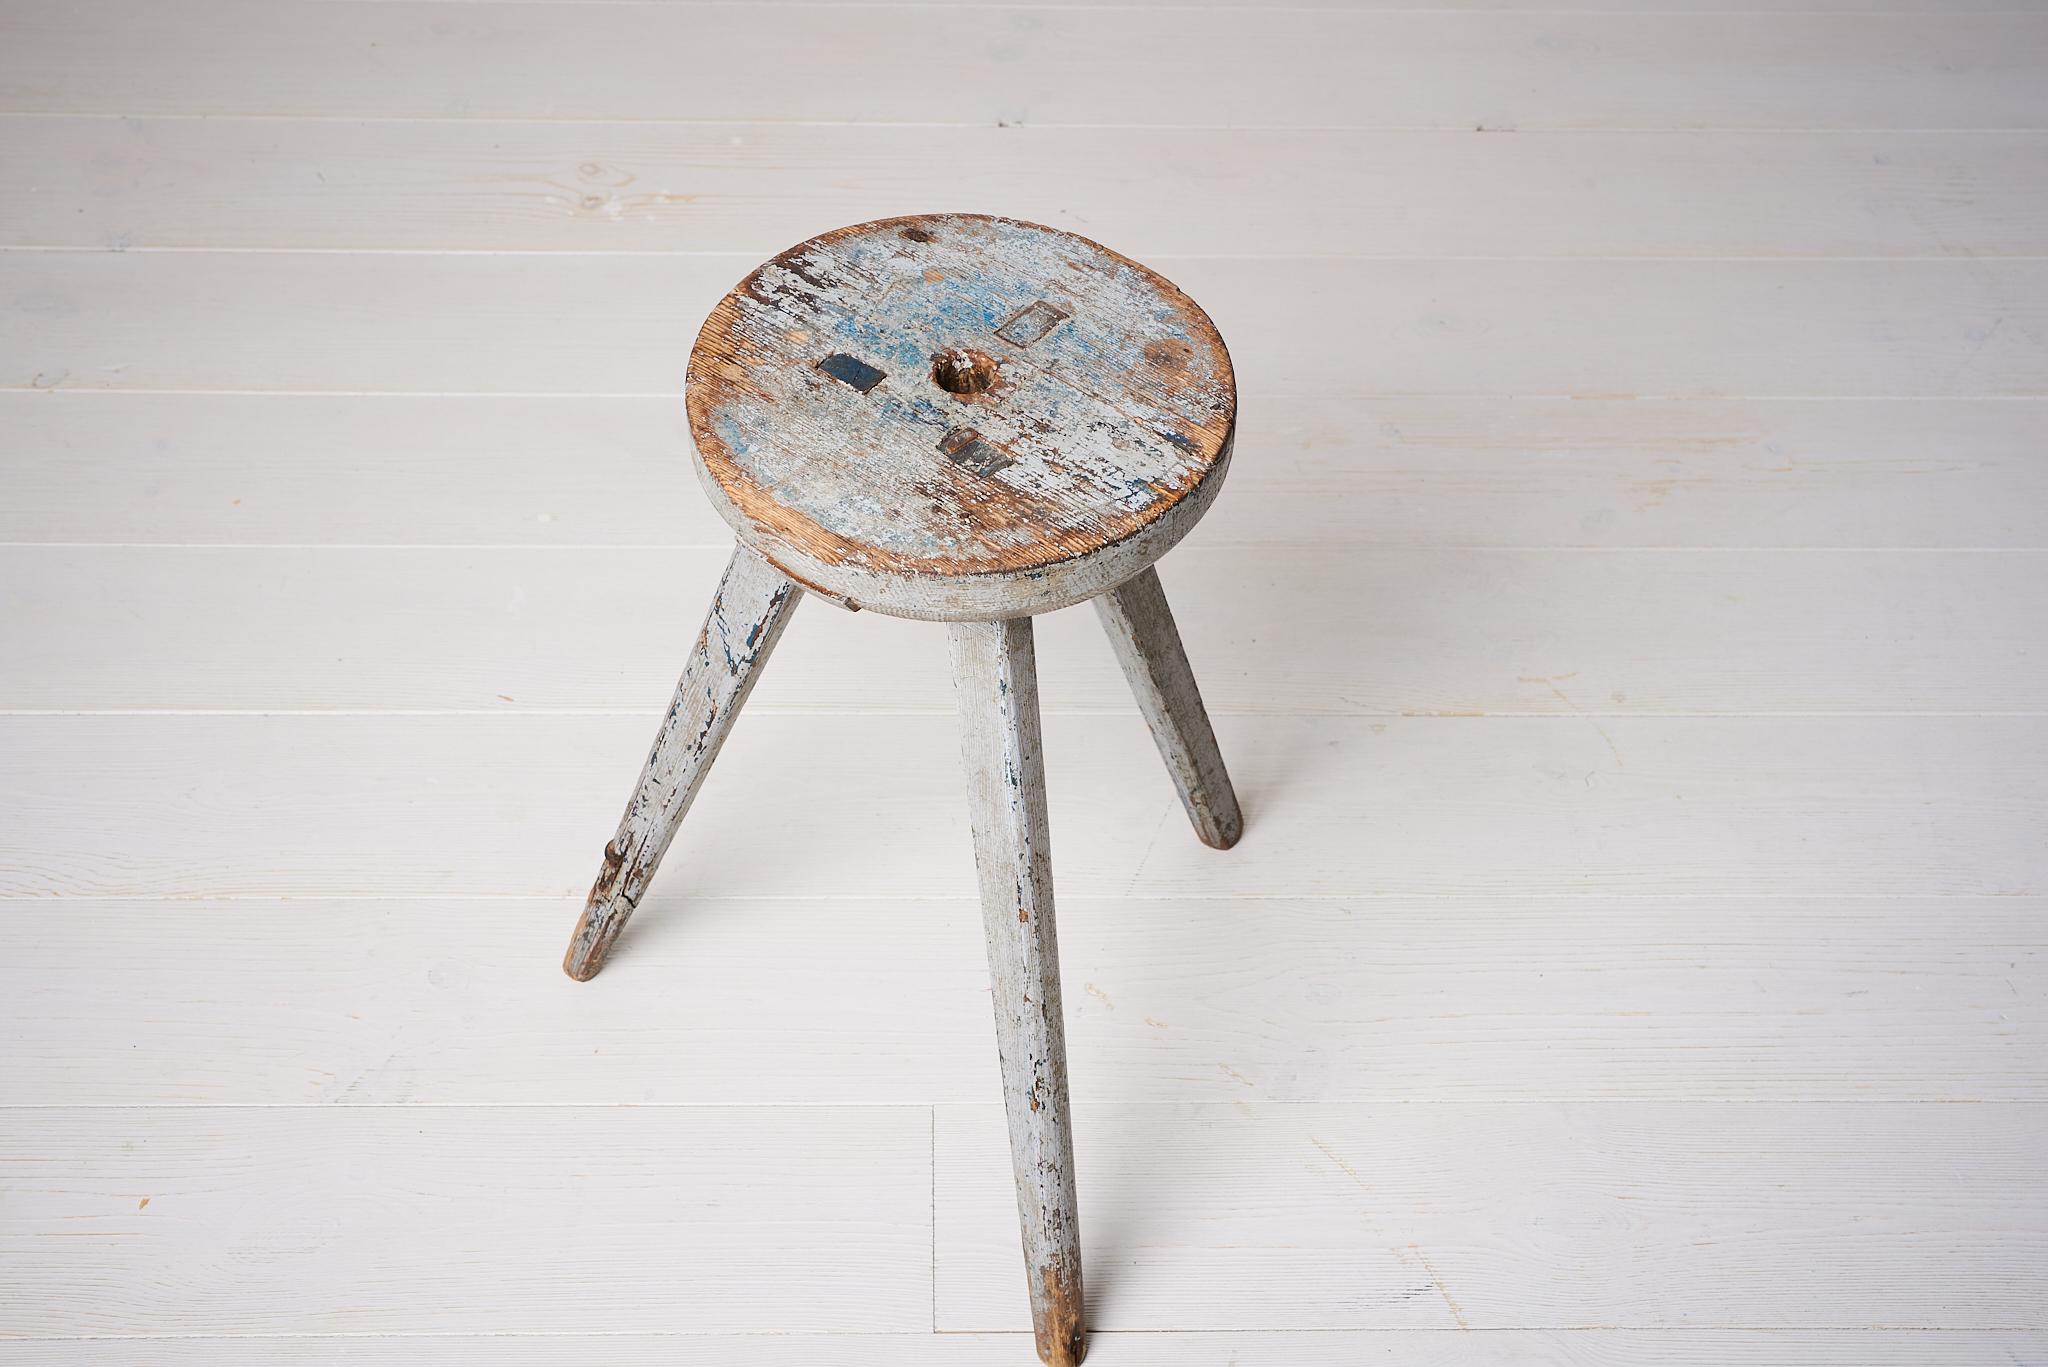 Hand-Crafted Antique Swedish Rustic Folk Art Stool For Sale